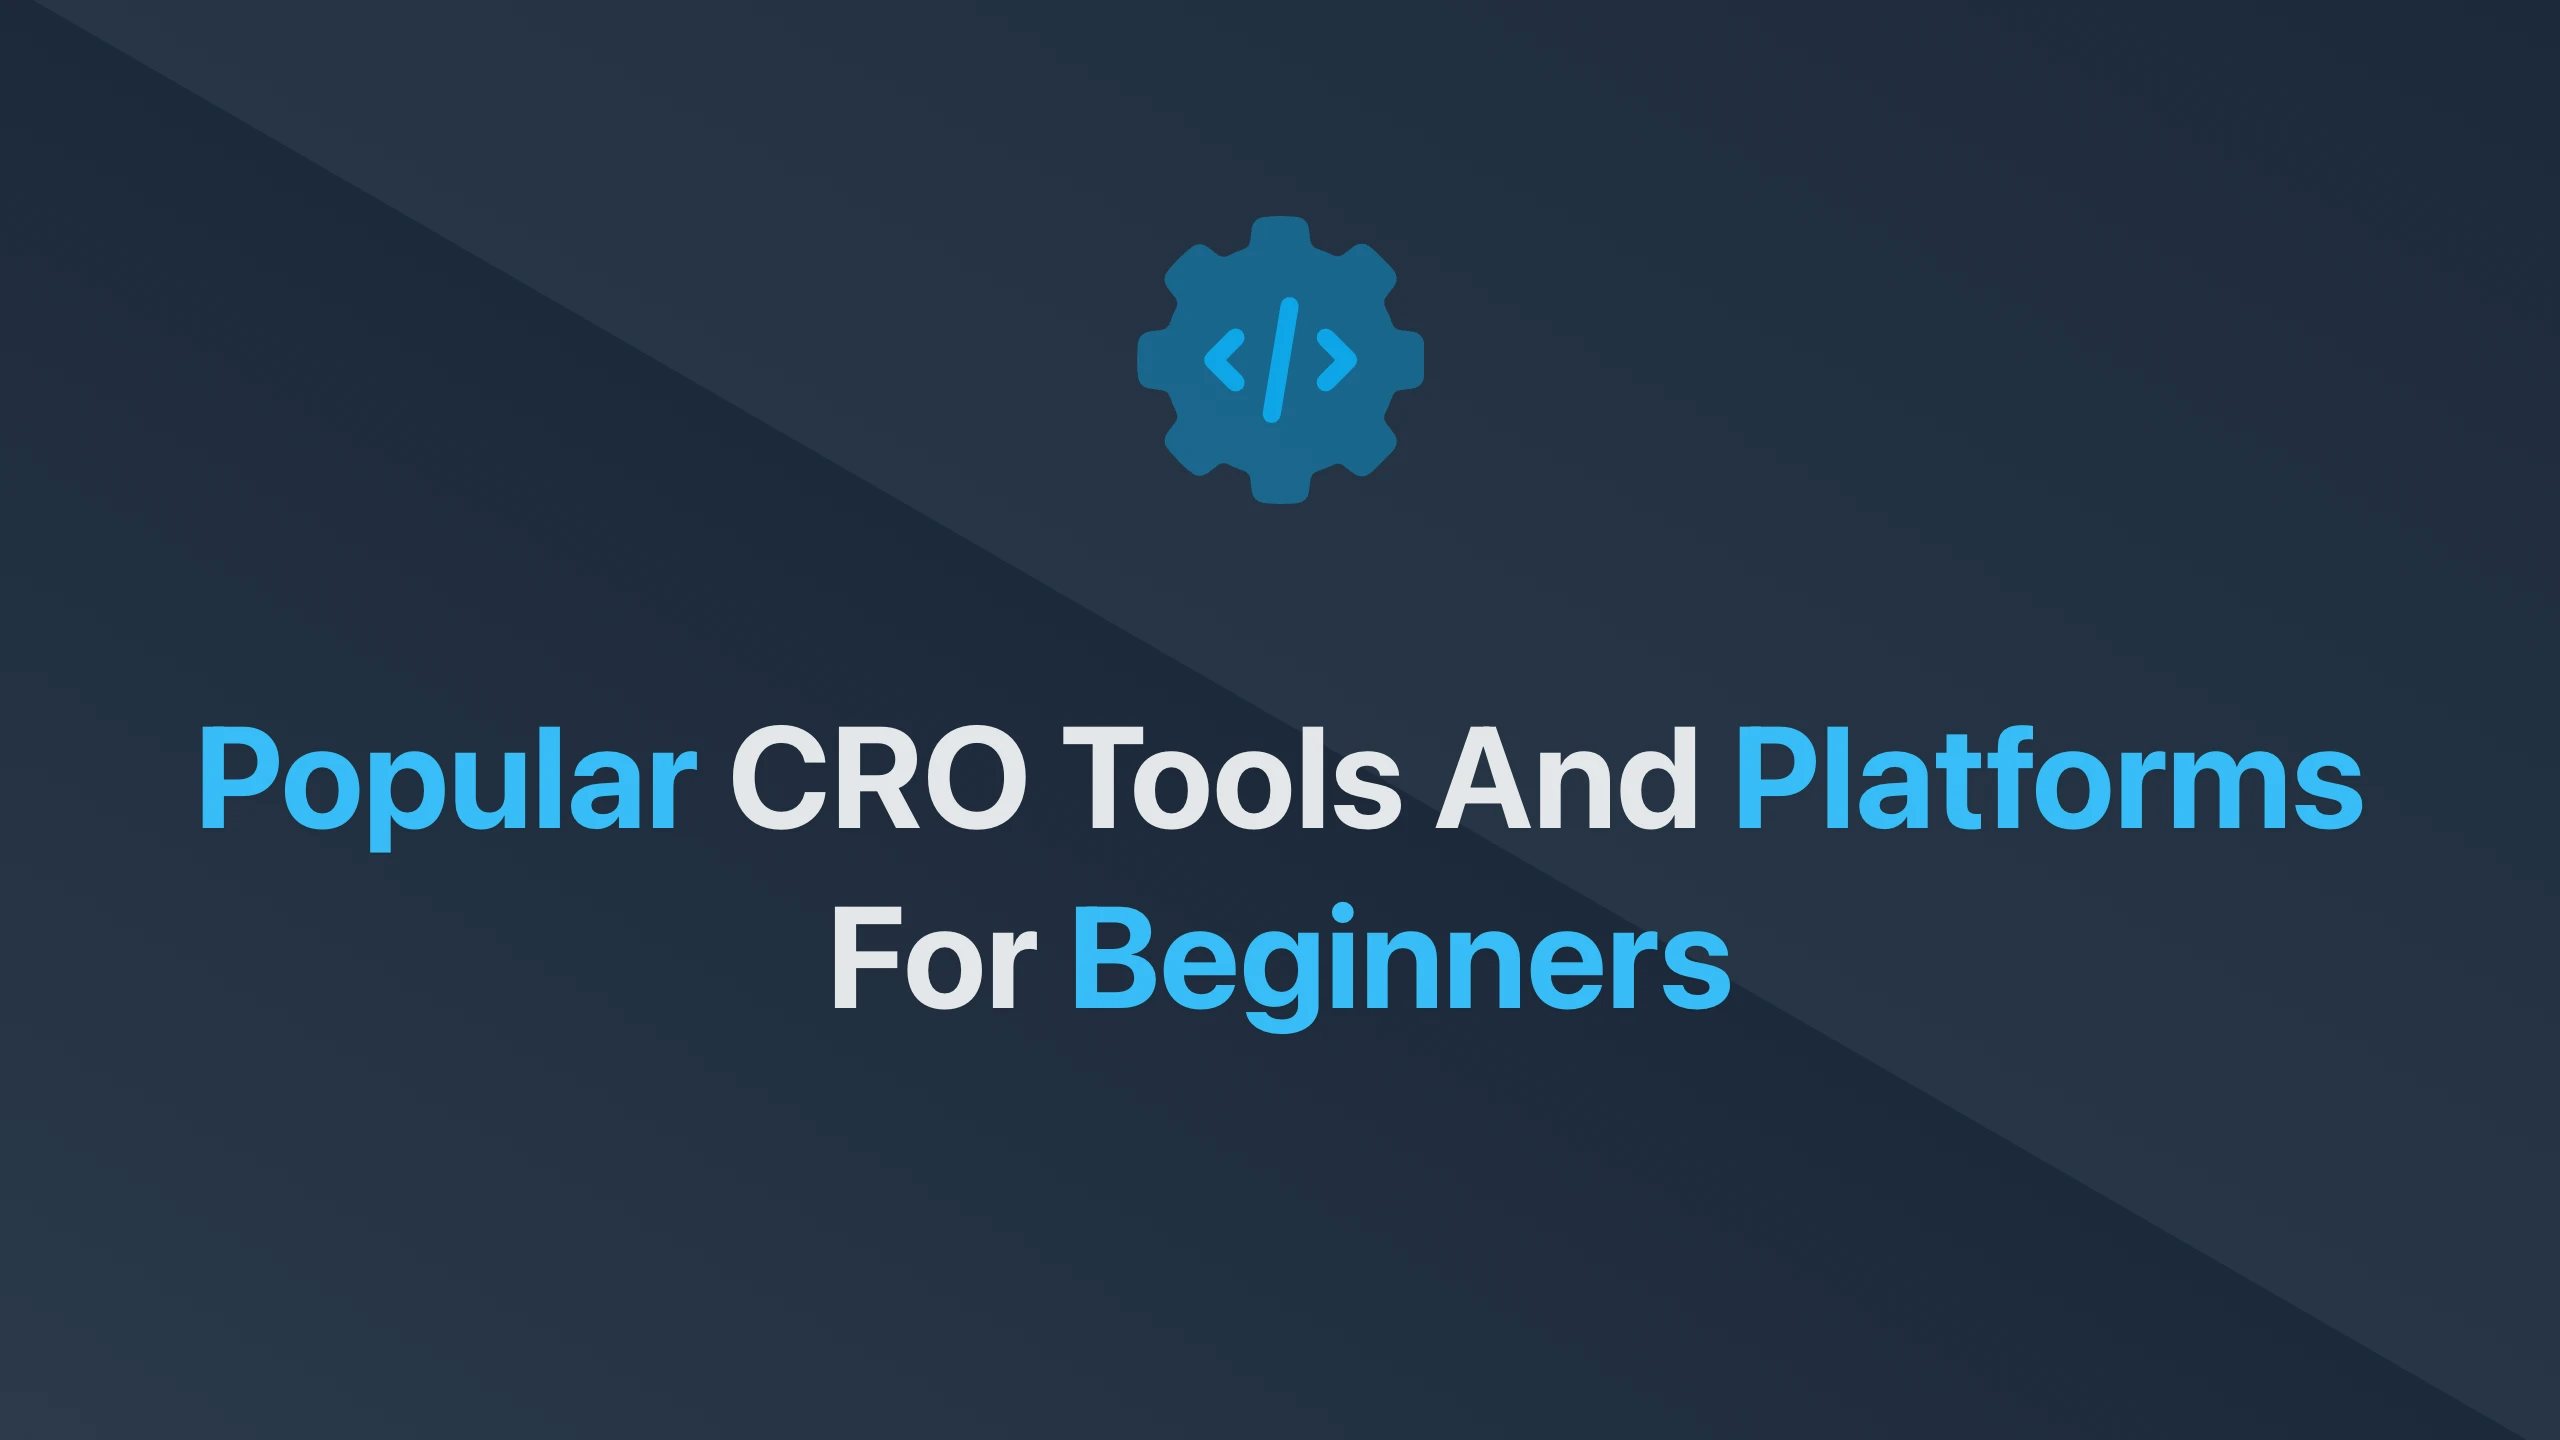 Cover Image for Popular CRO Tools and Platforms for Beginners